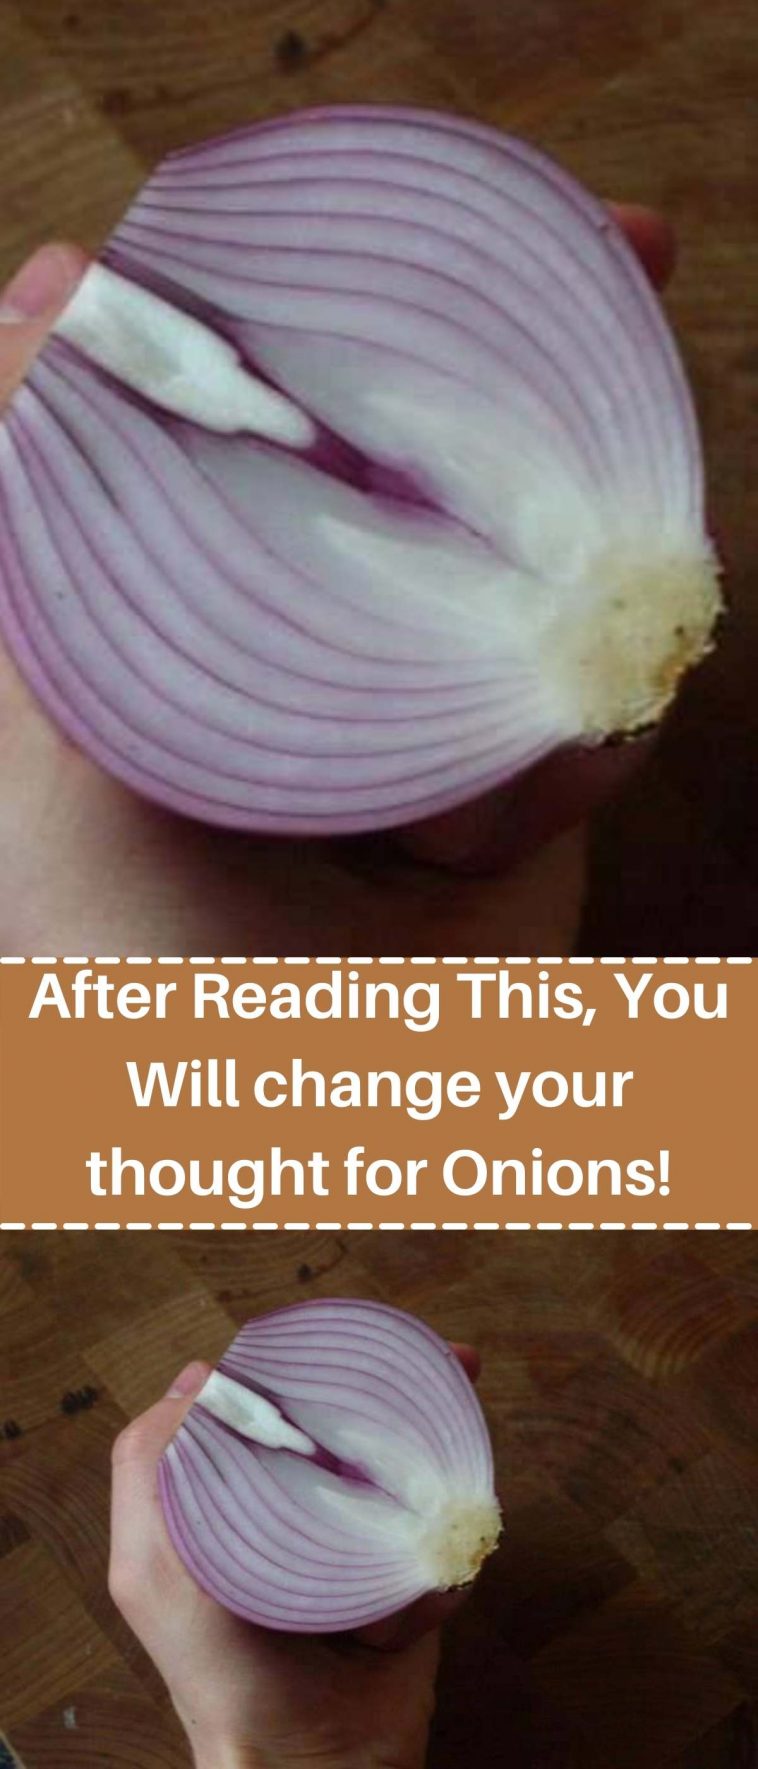 After Reading This, You Will change your thought for Onions!